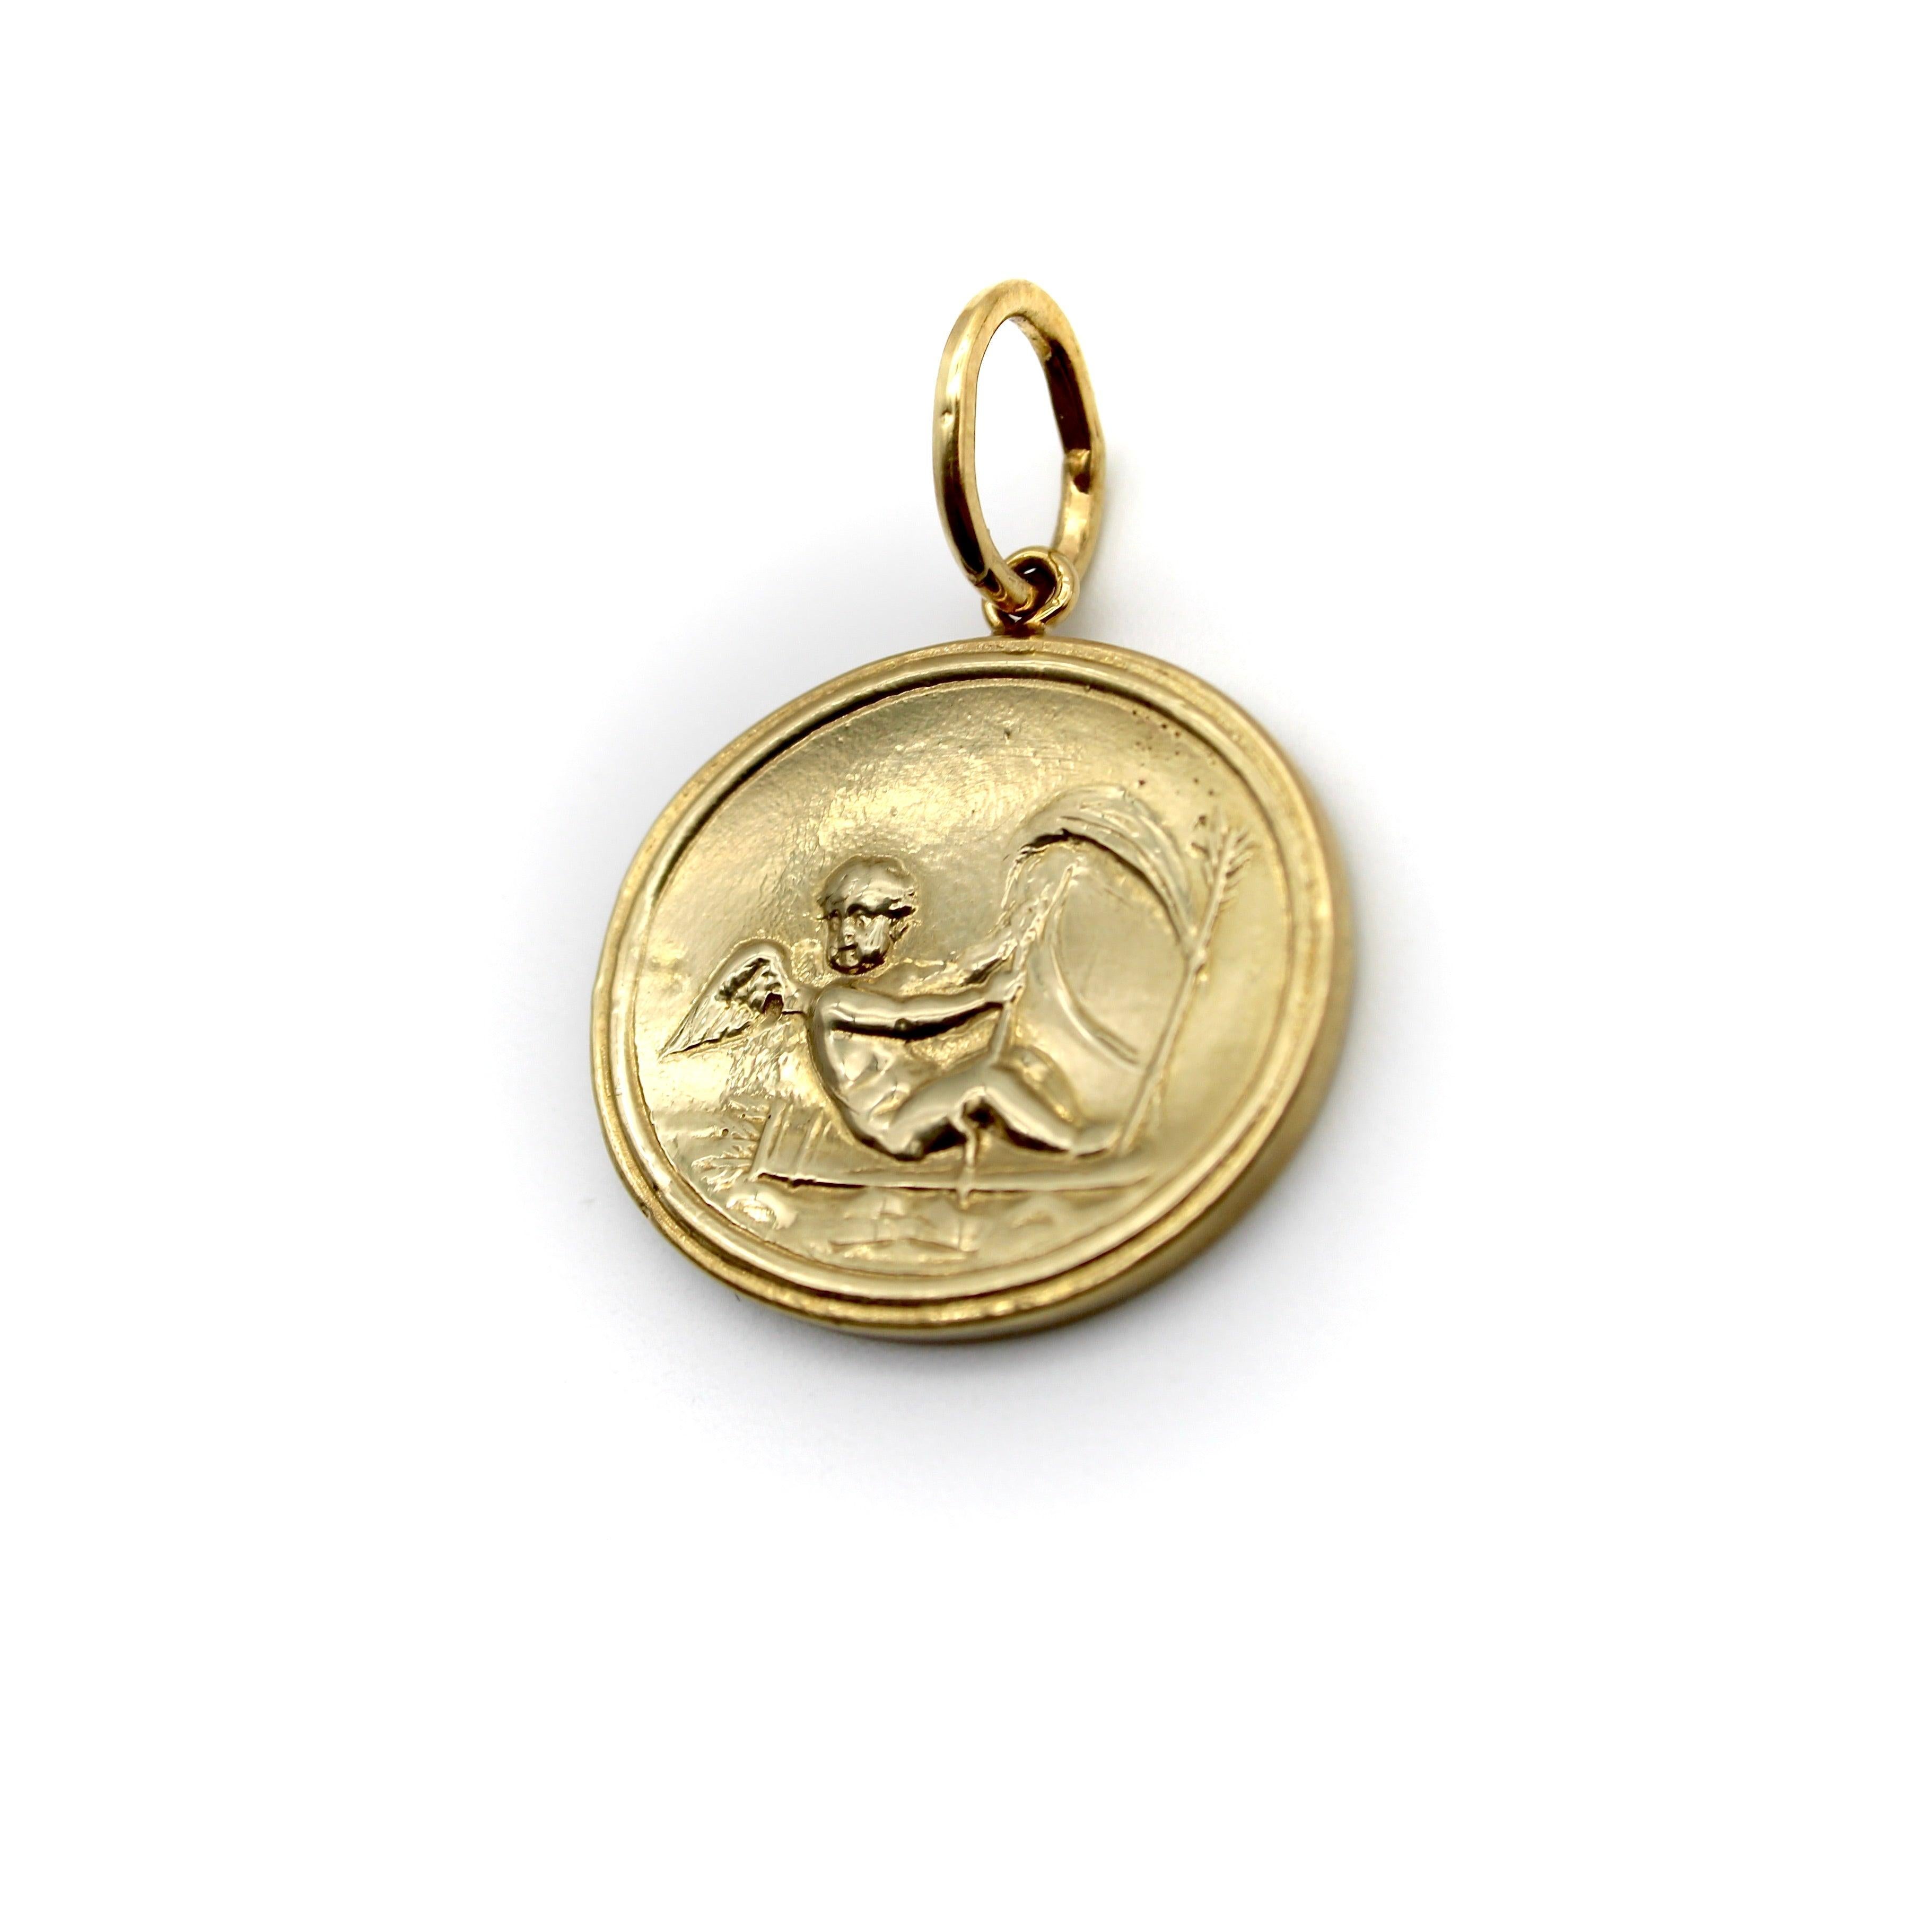 Created as part of our signature collection, this 14k gold intaglio medallion depicts Cupid seated on top of a bow quiver. Cupid, the god of love and attraction, draws his arrow, ready to strike an unsuspecting victim with the power of love. Beneath